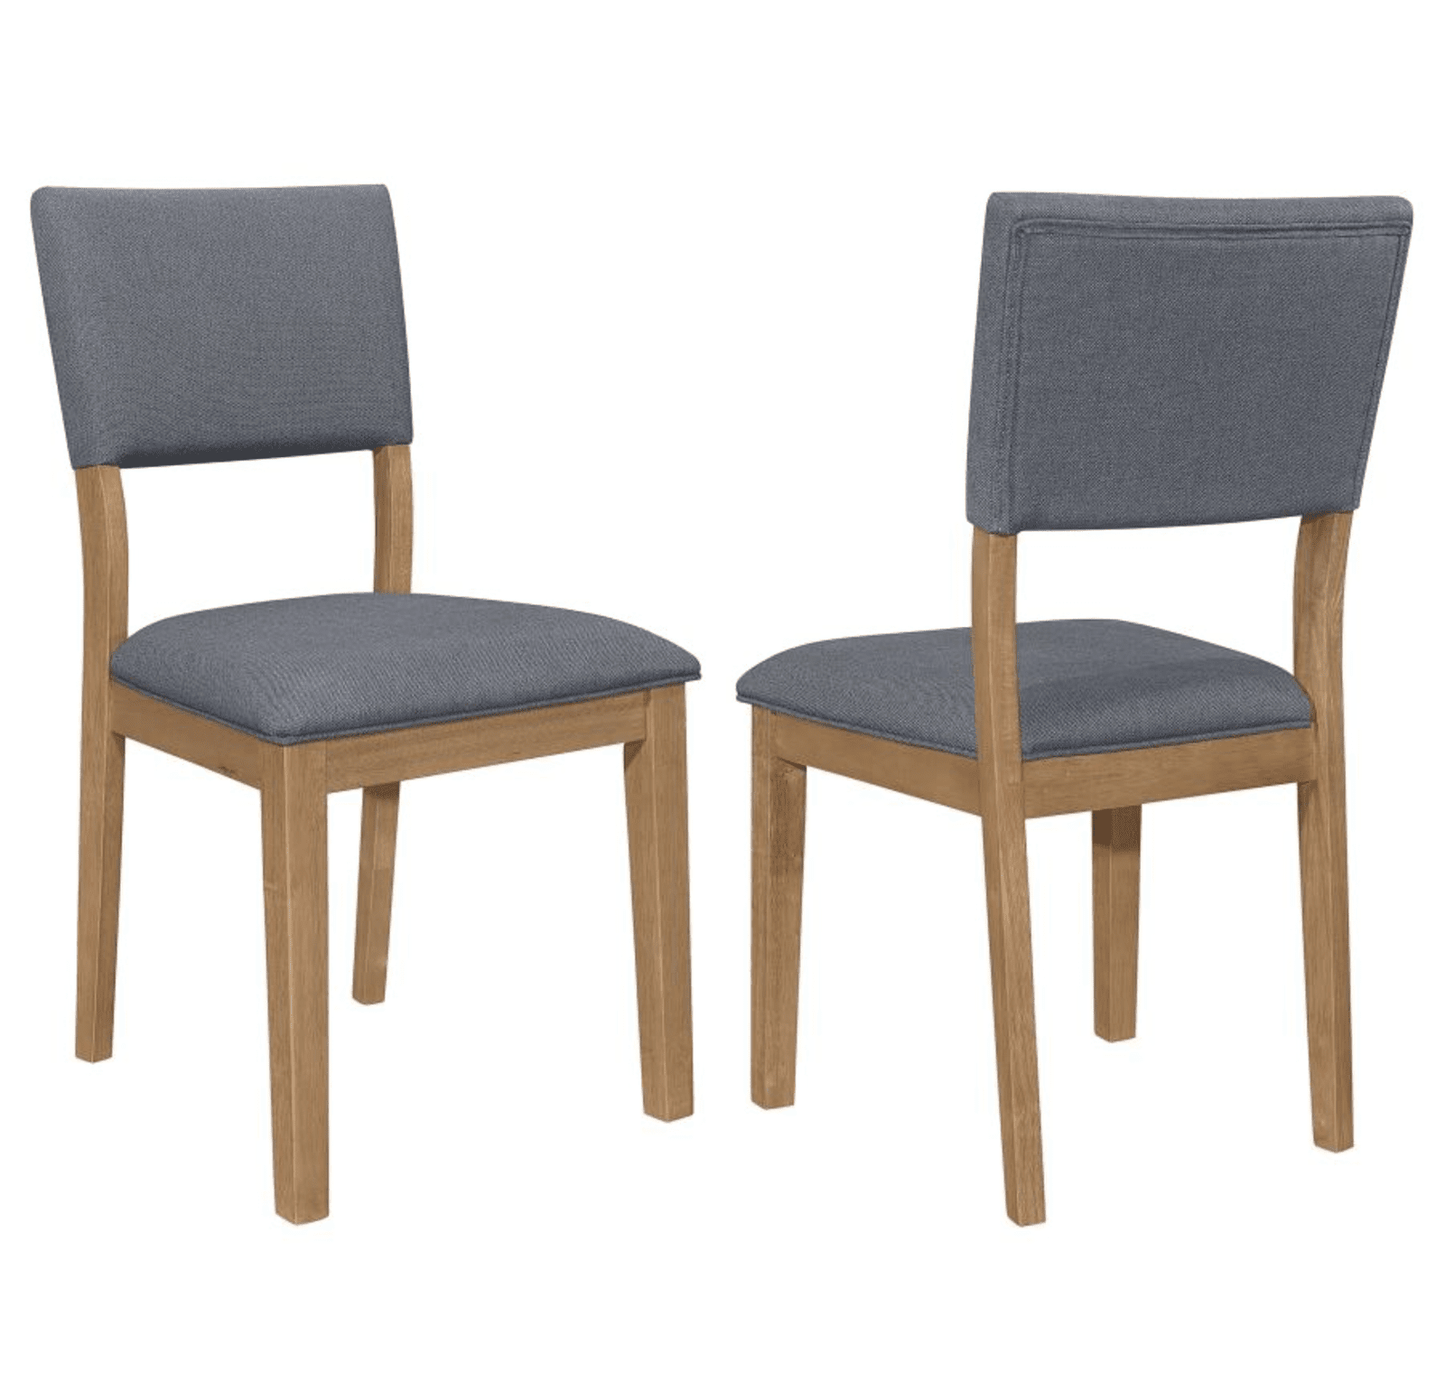 Sharon Open Back Padded Upholstered Dining Side Chair Blue and Brown Set of 2